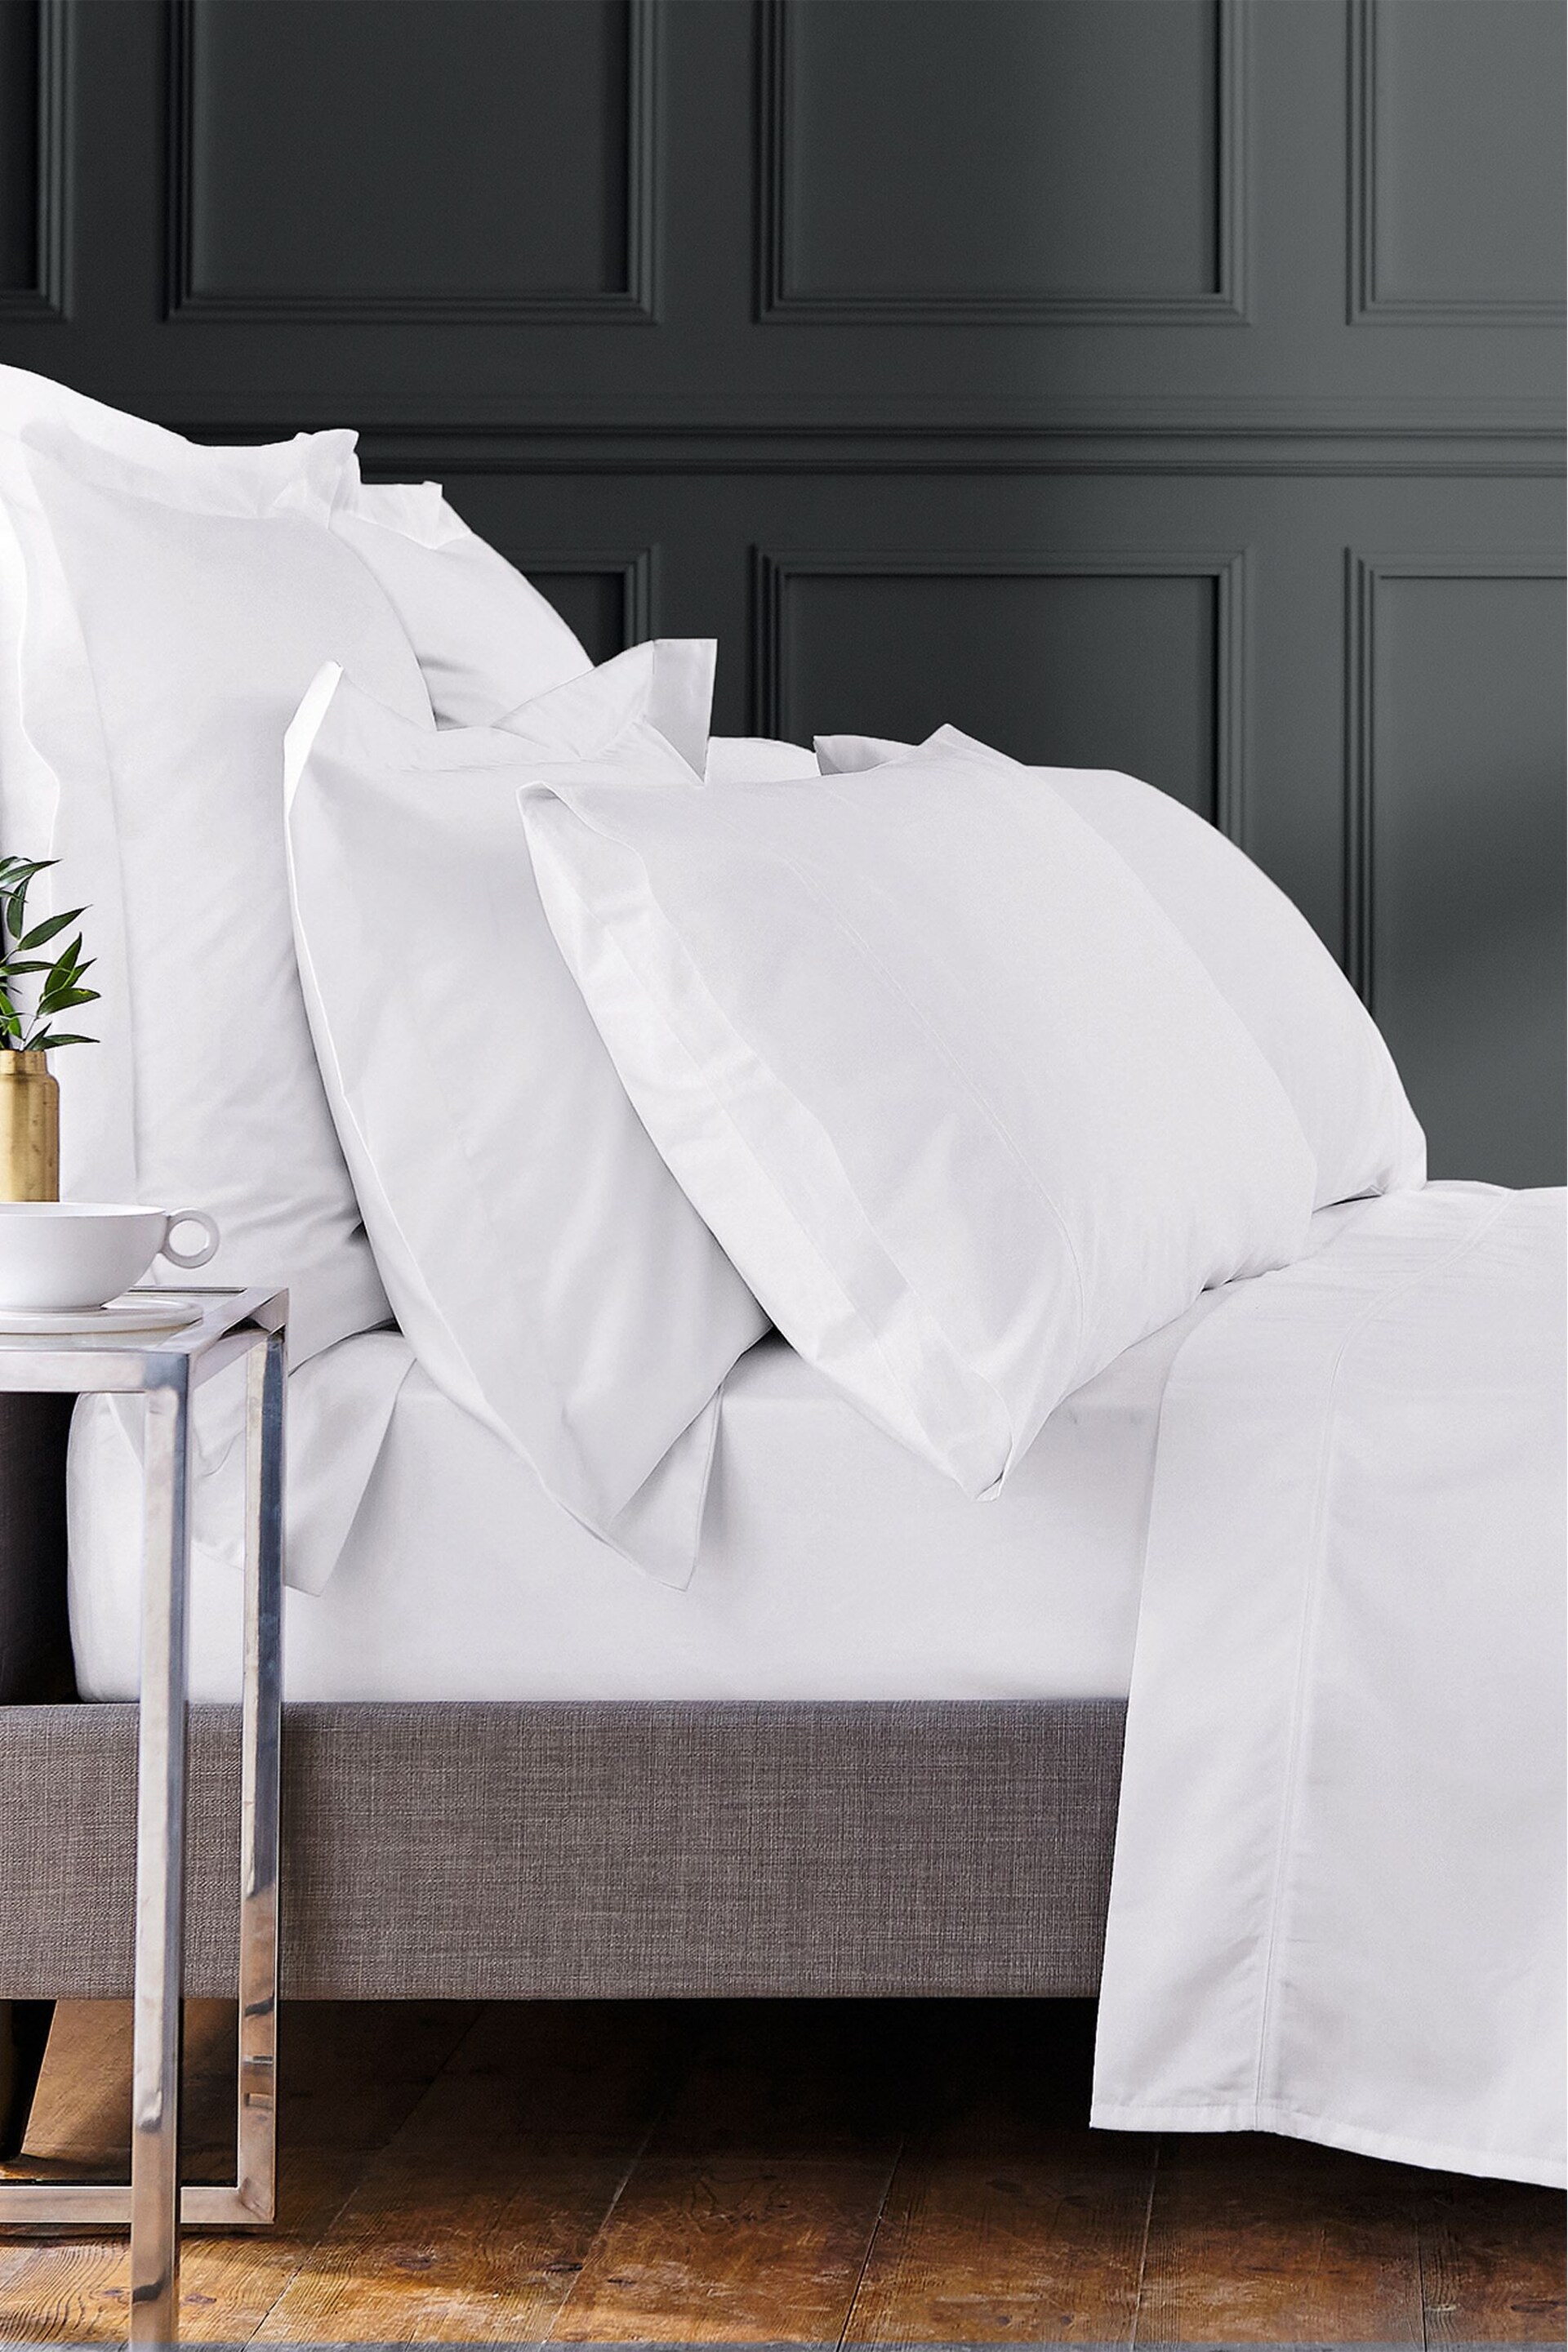 Bedeck Of Belfast White 1000 Thread Count Egyptian Cotton Sateen Fitted Sheet - Image 1 of 2